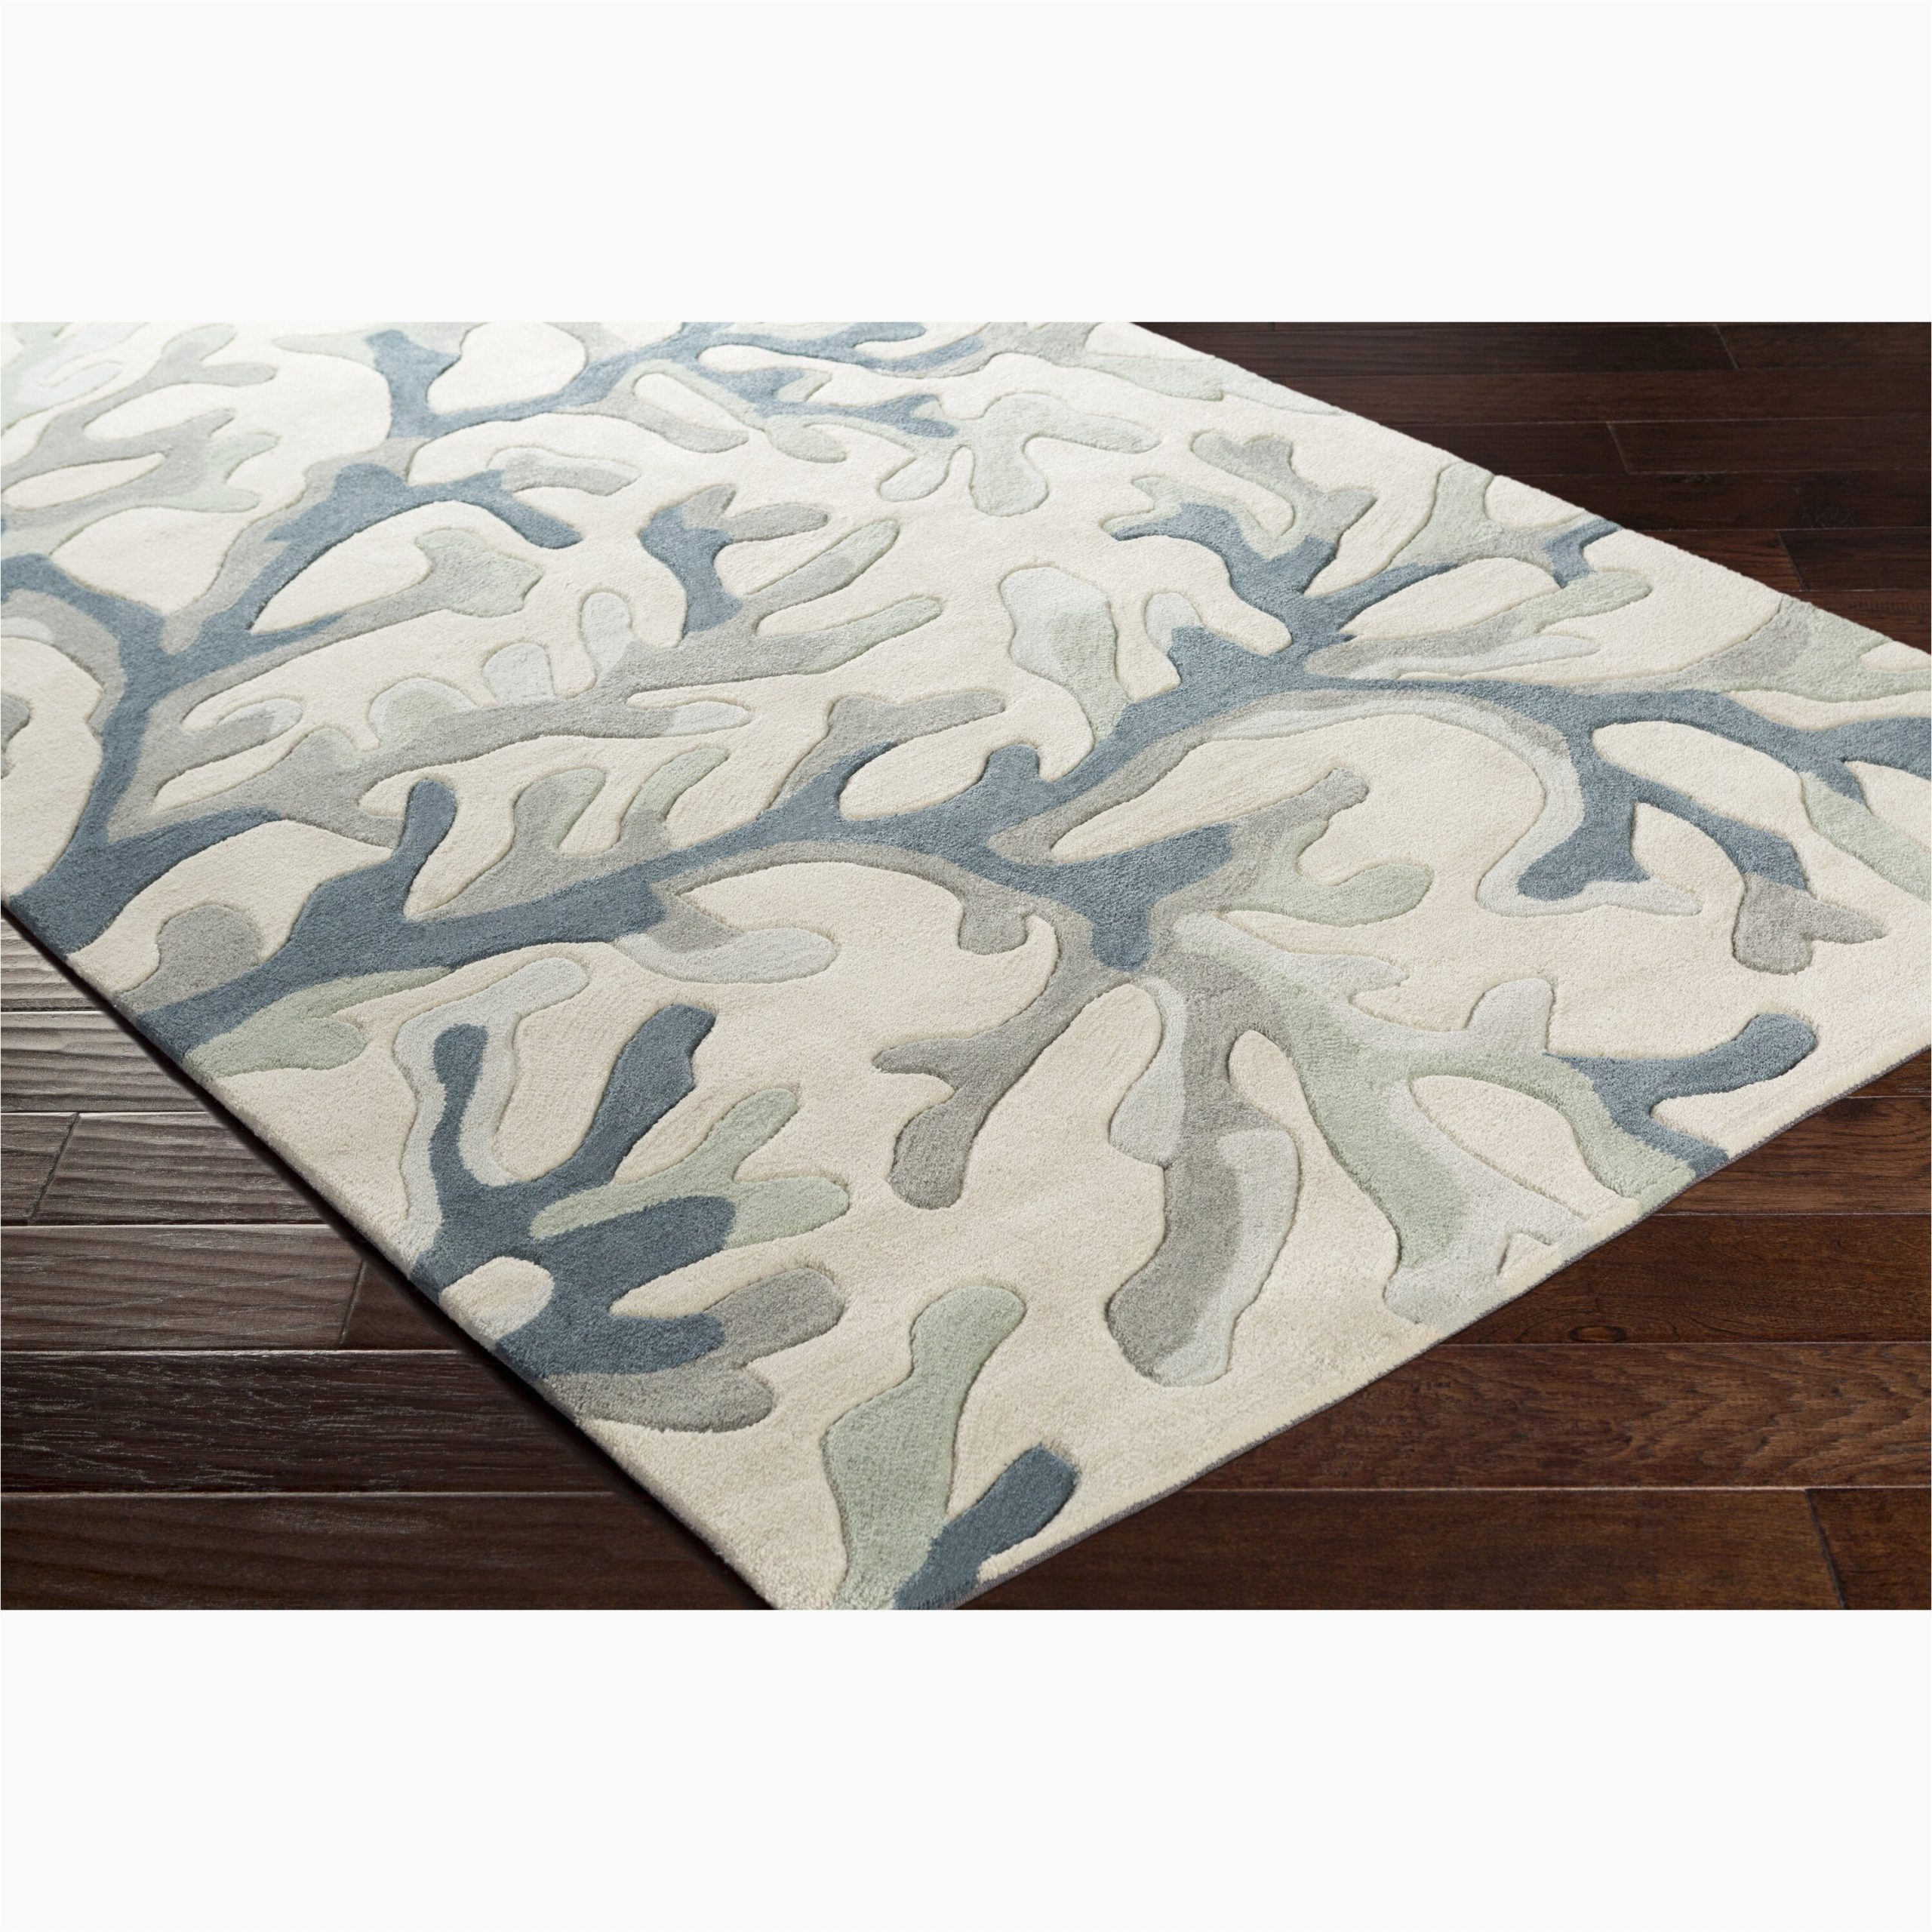 Teal and Gray Bathroom Rugs Beachcrest Home Bennett Light Gray Teal area Rug Reviews